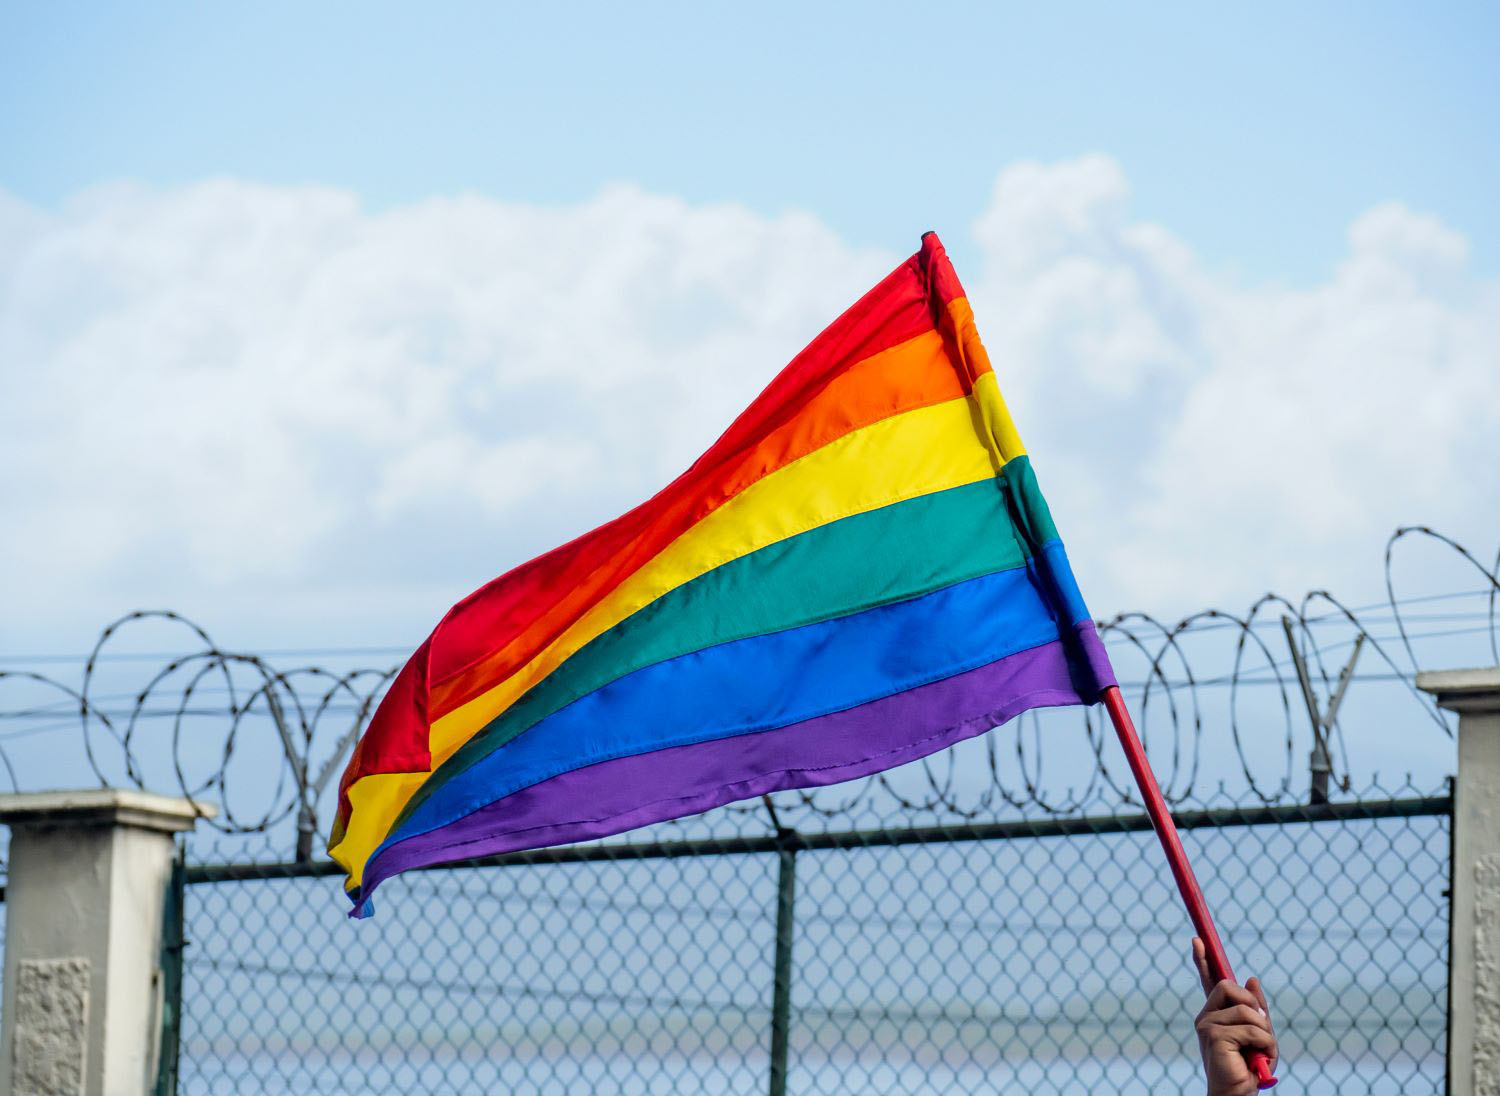 An LGBTQ + flag fluttering in the breeze with a barbed wire fence in the background and a blue sky with clouds.